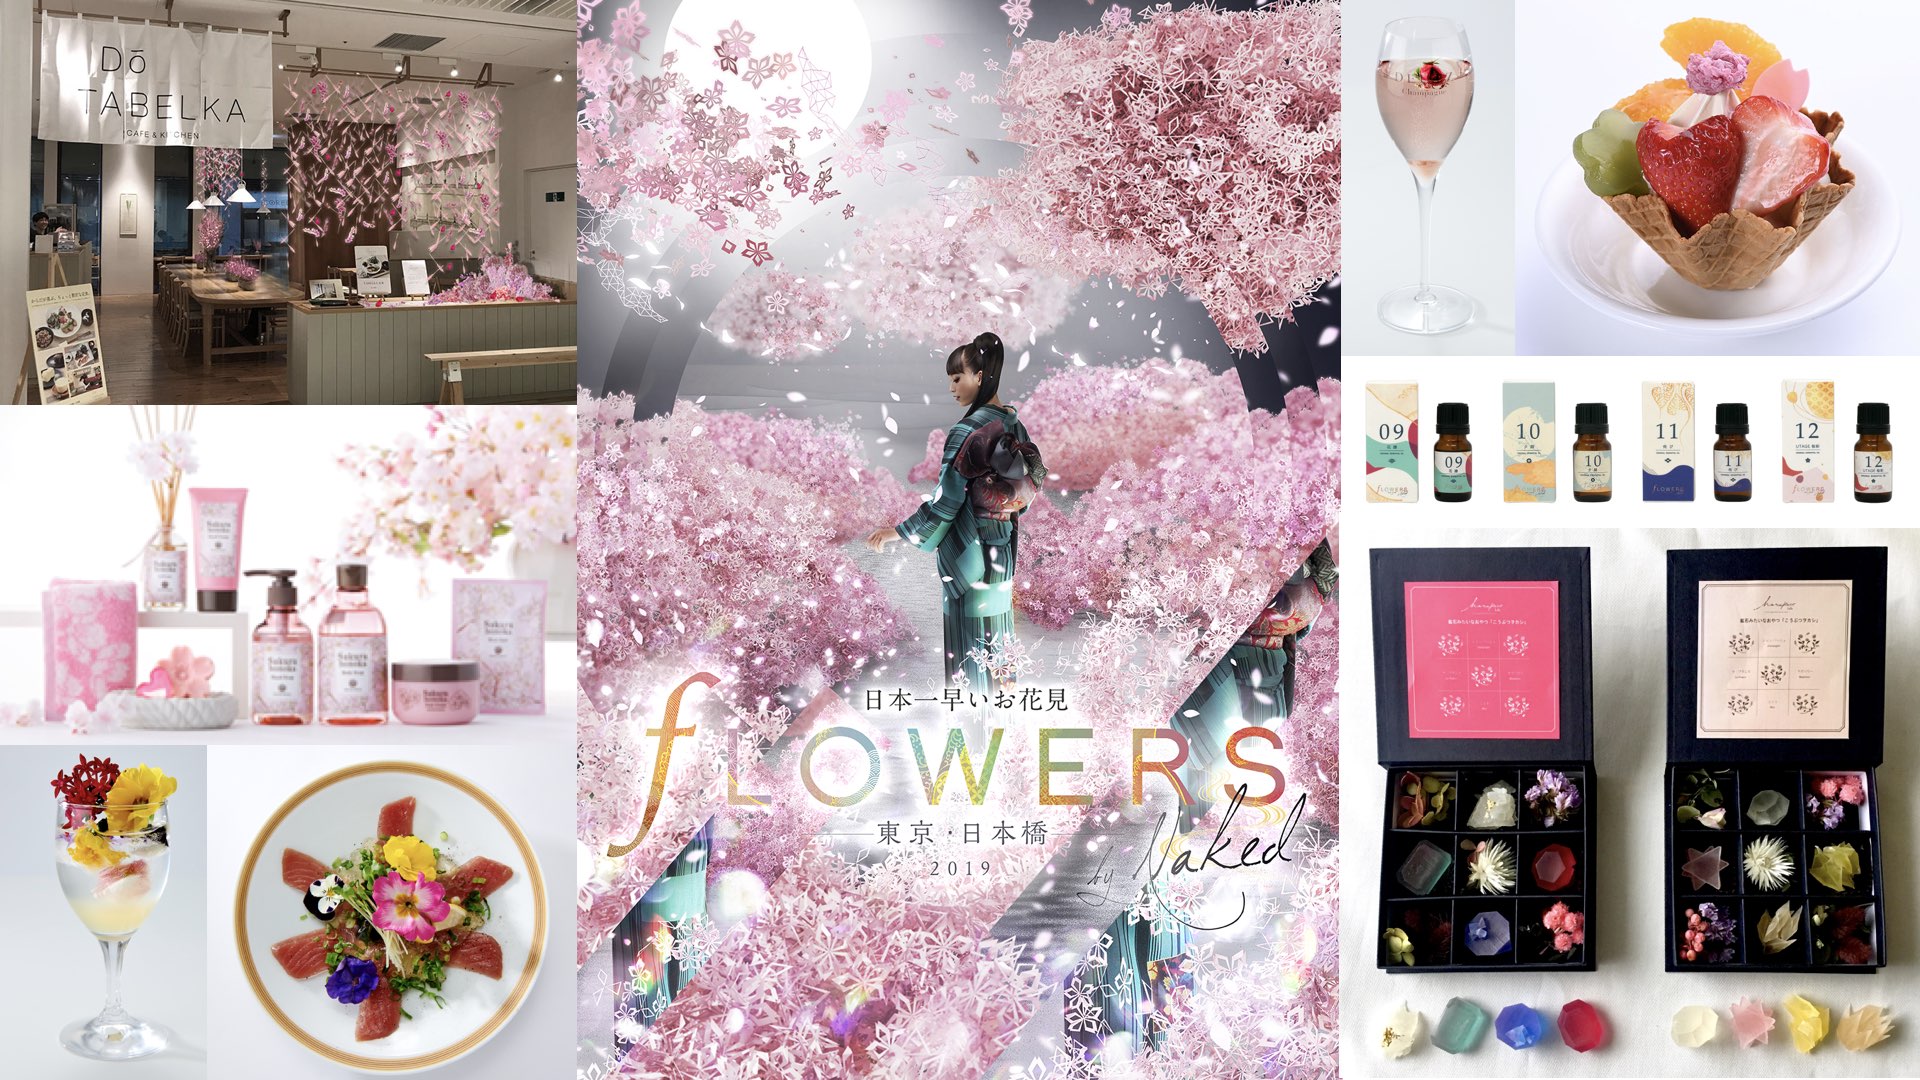 【「FLOWERS BY NAKED 2019 ー東京・日本橋ー」】食べて、見て、遊ぶフラワージェニックな日本橋 NAKED FLOWERS 2021 −桜− 世界遺産・二条城